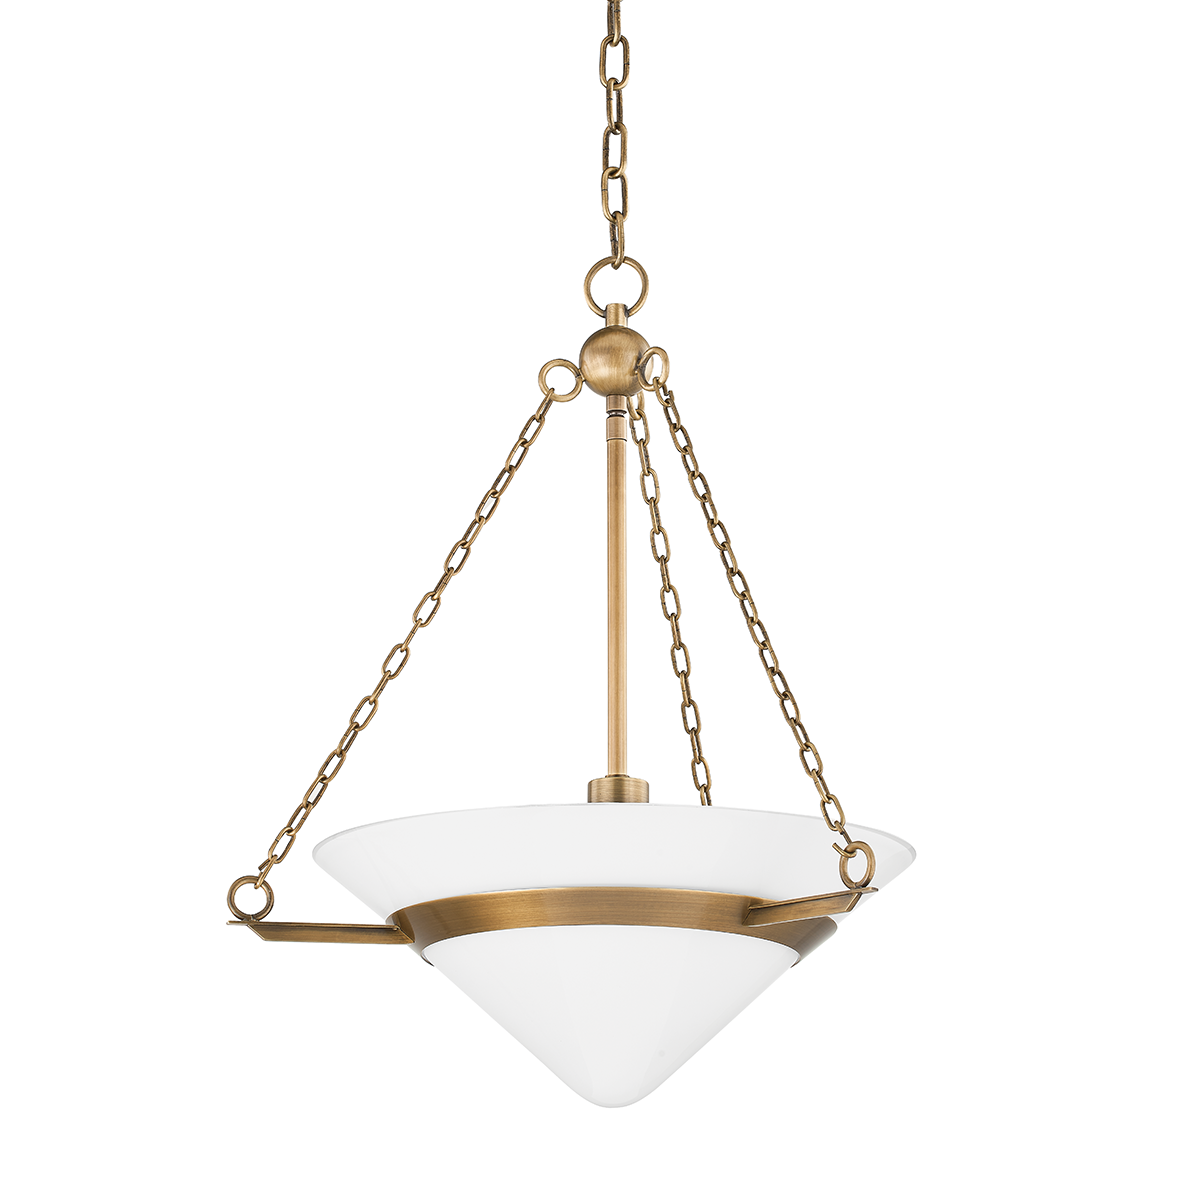 Patina Brass Frame with Opal Glossy Glass Shade Chandelier